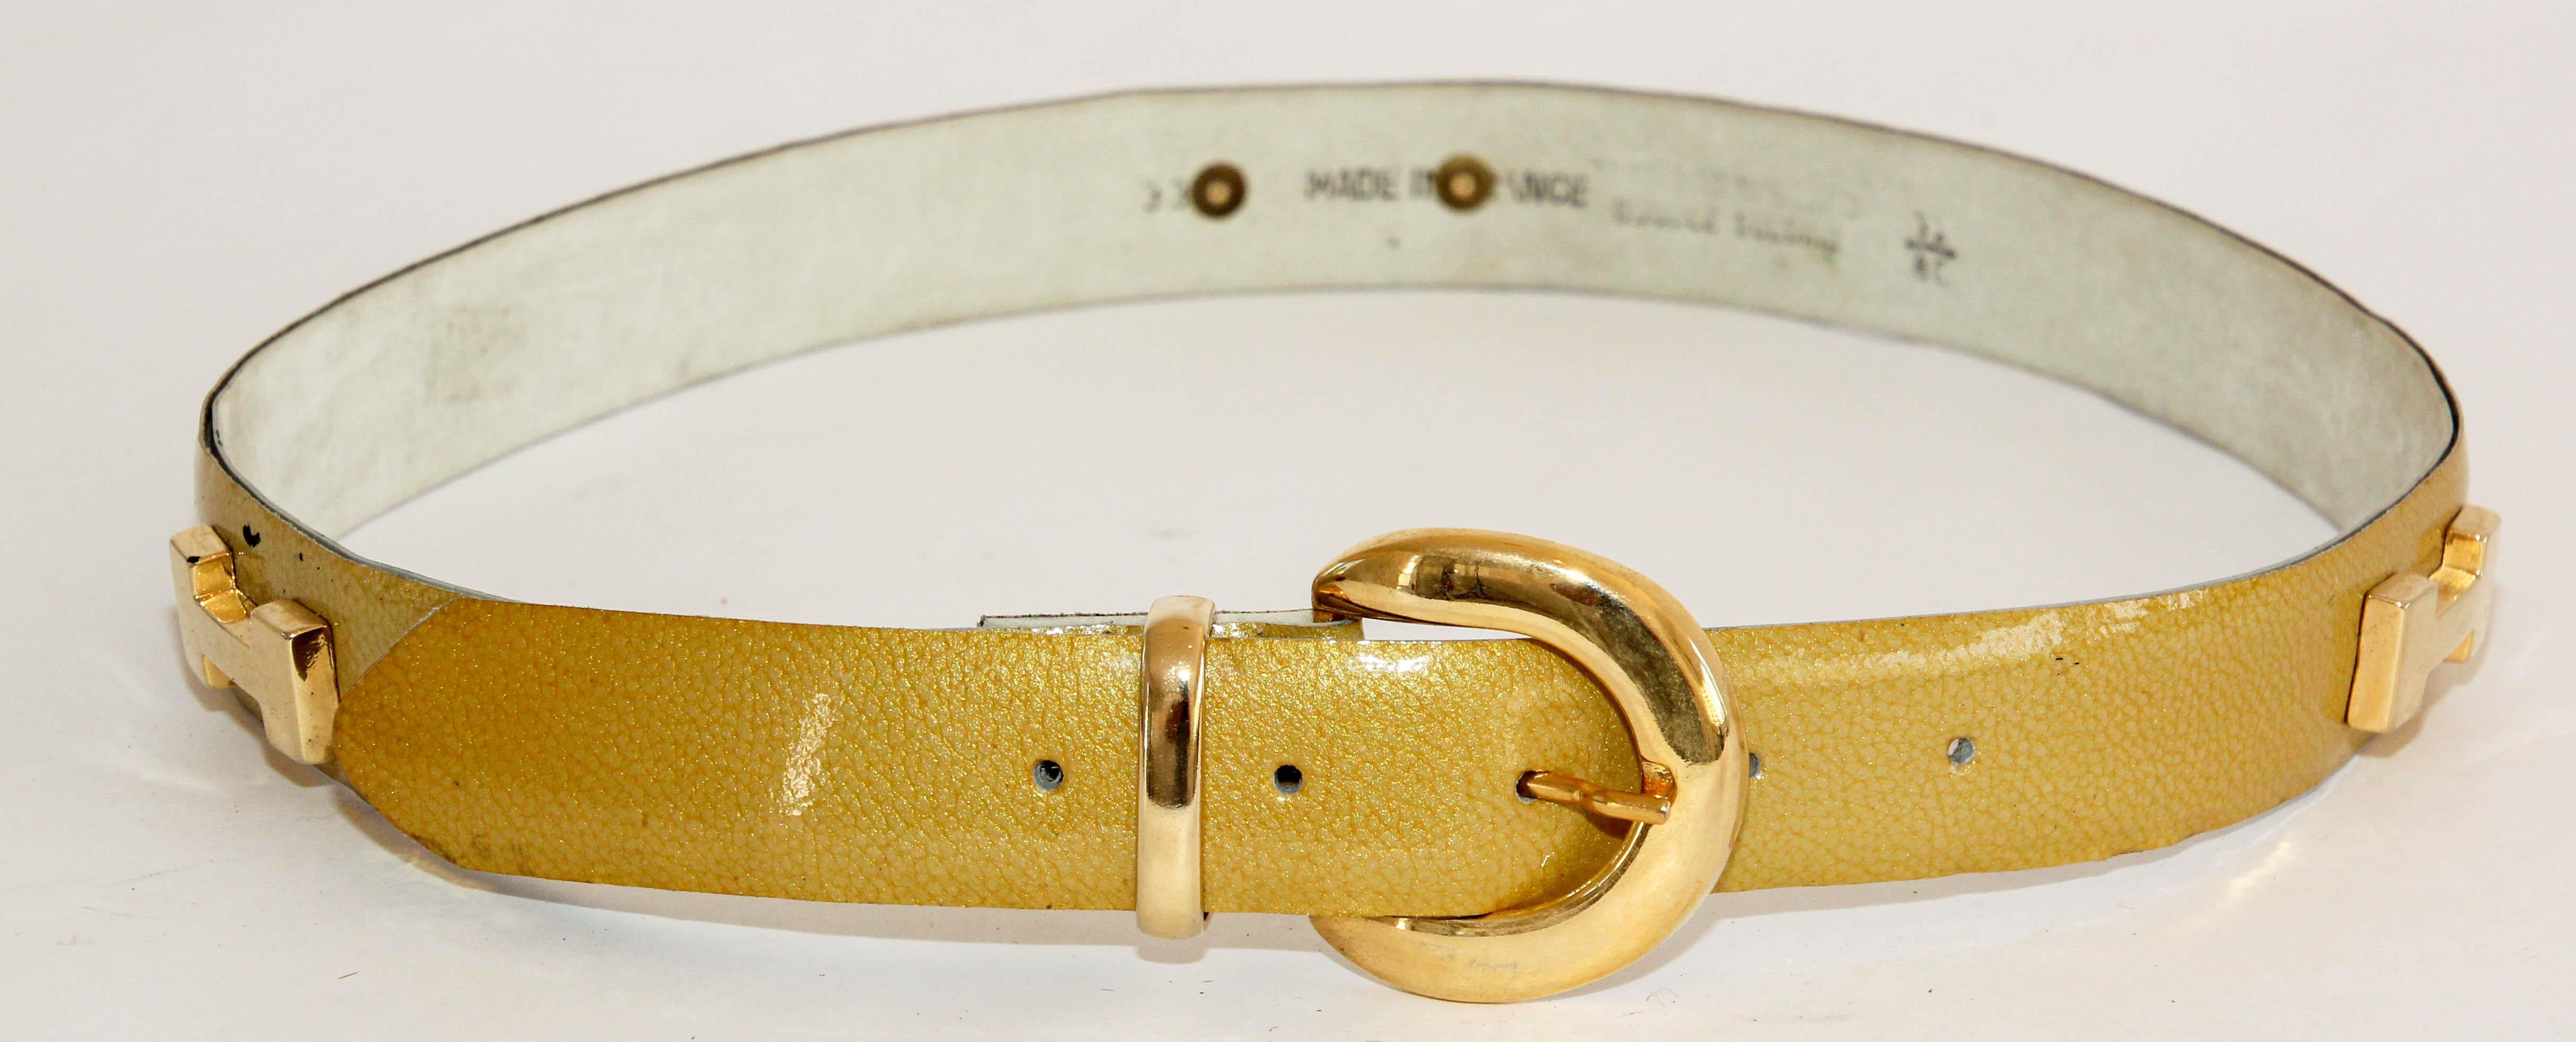 Vintage Patent Gold Leather Belt with H Brass Logo.
Gold patent leather, brass buckle.
Marked: Size 32 US, 80 EU.
No Hallmark.
Marked: Made In France.
Buckle is : 2 in H x 2 in. W.
Leather belt is 1.25 in. wide x 35 in long.